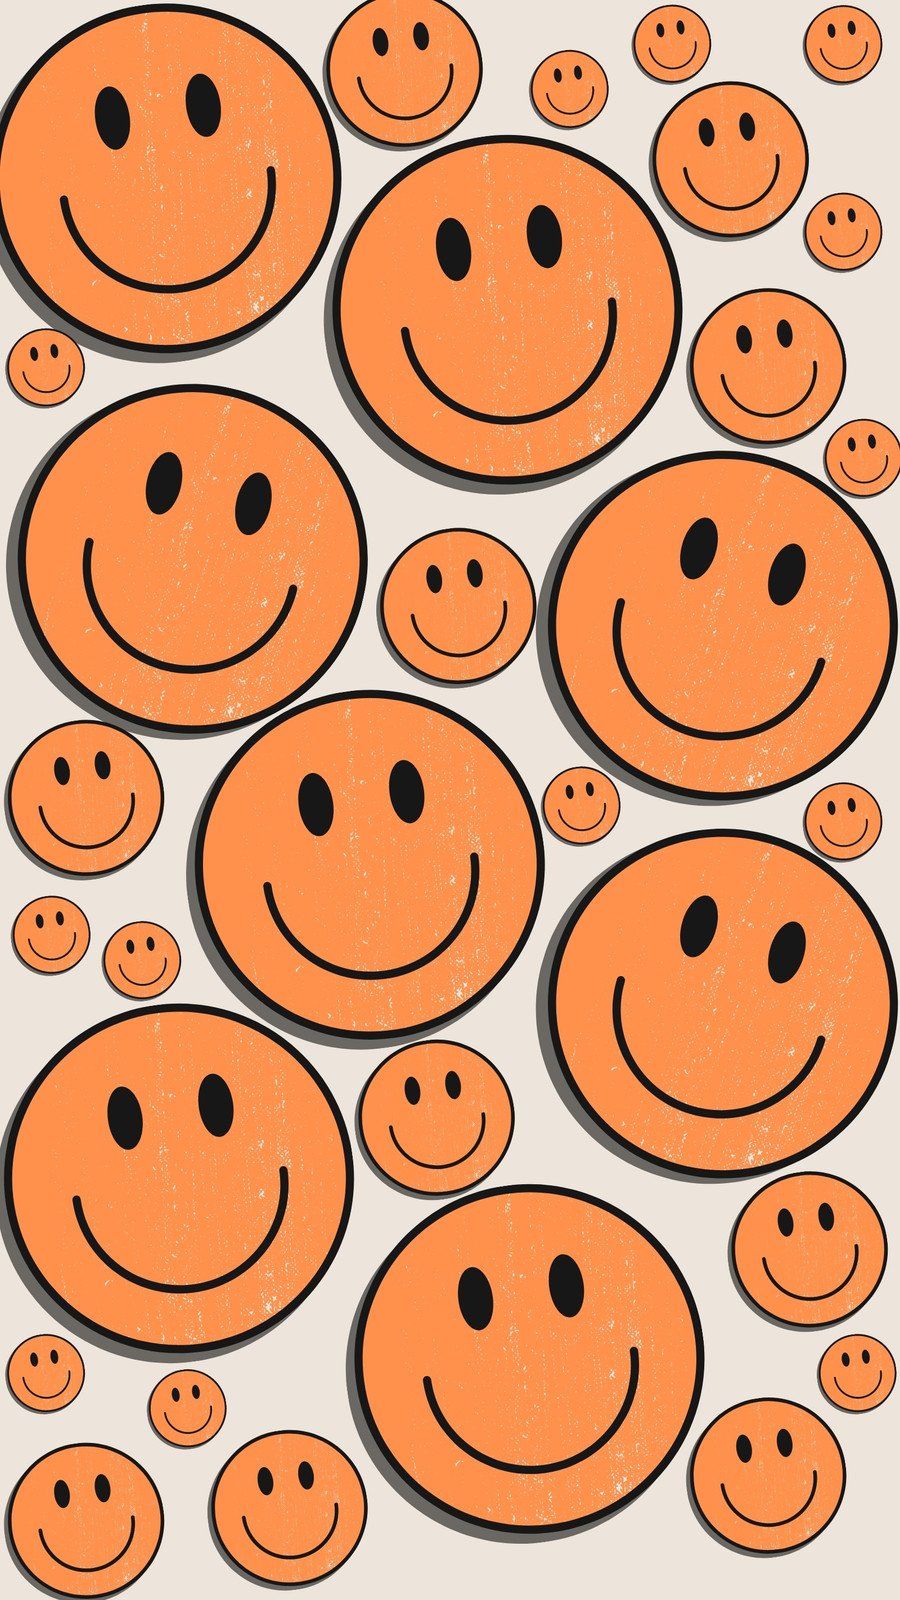 A bunch of orange smiley faces on a white background - Smiley